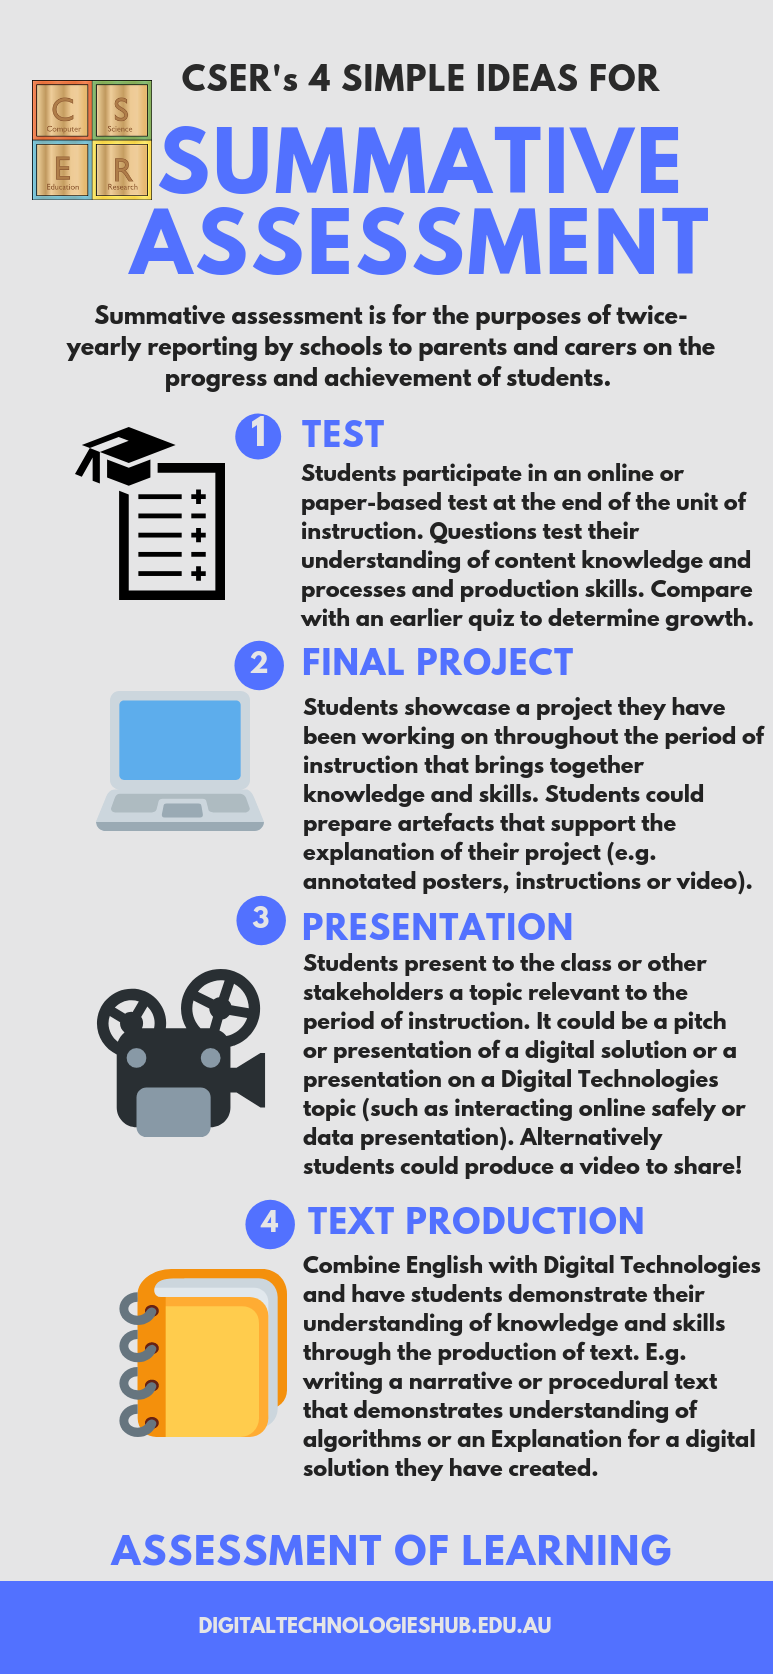 Infographic: CSER's 4 simple ideas for summative assessment. Introduction: Formative assessment is for the purposes of twice-yearly reporting by schools to parents and carers on the progress and achievement of students. Step 1: Test. Students participate in an online or paper-based test at the end of the unit of instruction. Questions test their understanding of content knowledge and processes and production skills. Compare with an earlier quiz to determine growth. Step 2: Final project. Students showcase a project they have been working on throughout the period of instruction that brings together knowledge and skills. Students could prepare artefacts that support the explanation of their project (for example, annotated posters, instructions or video). Step 3: Presentation. Students present to the class or other stakeholders a topic relevant to the period of instruction. It could be a pitch or presentation of a digital solution or a presentation on a Digital Technologies topic (such as interacting online safely or data representation). Alternatively students could produce a video to share.  Step 4: Text production. Combine English with Digital Technologies and have students demonstarte their understanding of knowledge and production skills through the production of text. For example, witing a narrative or procedural text that demonstrates an understanding of algorithms or an Explanation for a digital solution they have created.